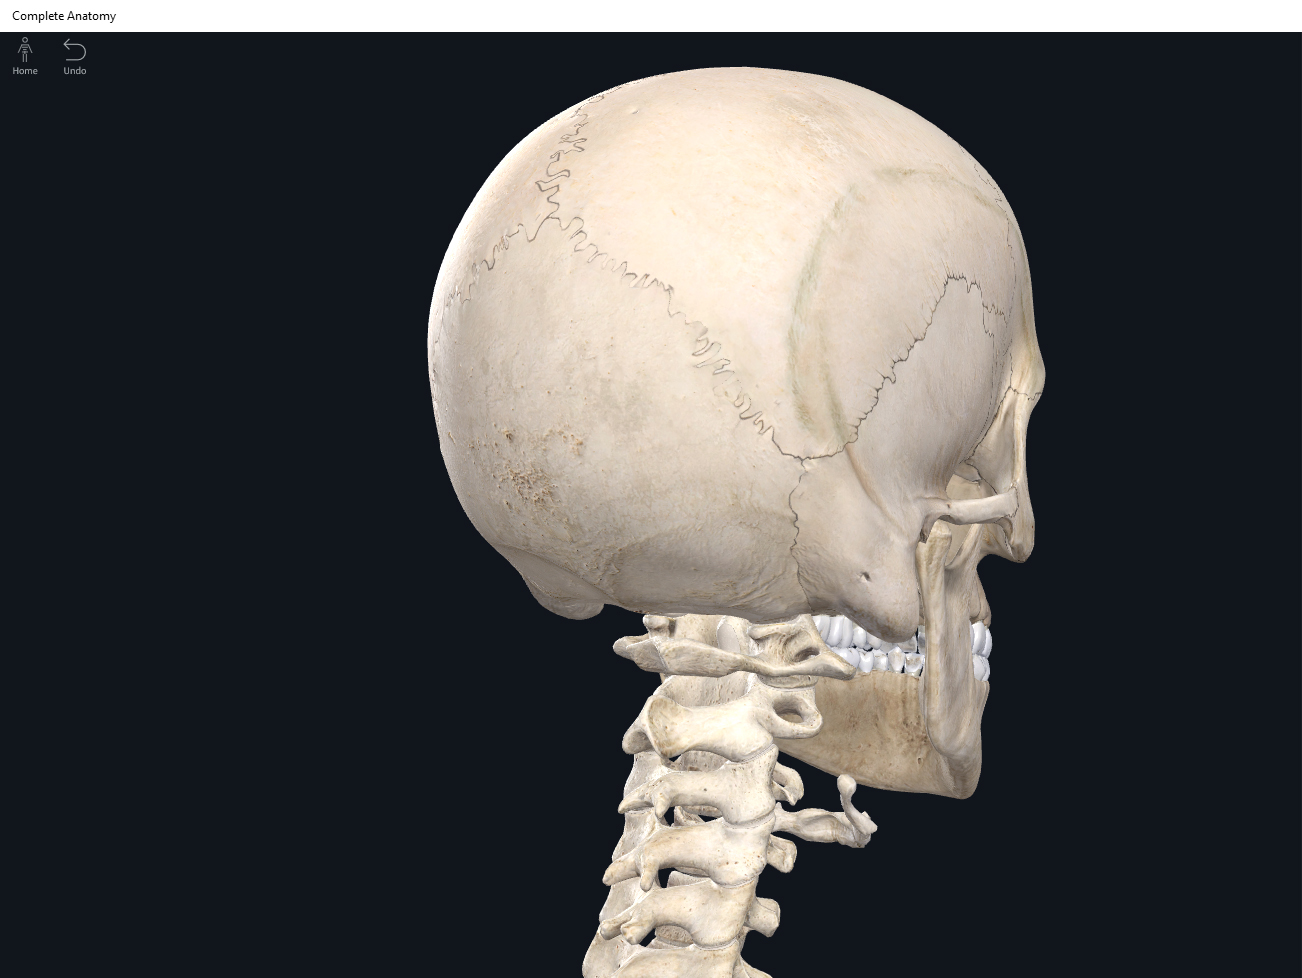 which of these skull bones surround and protect the brain